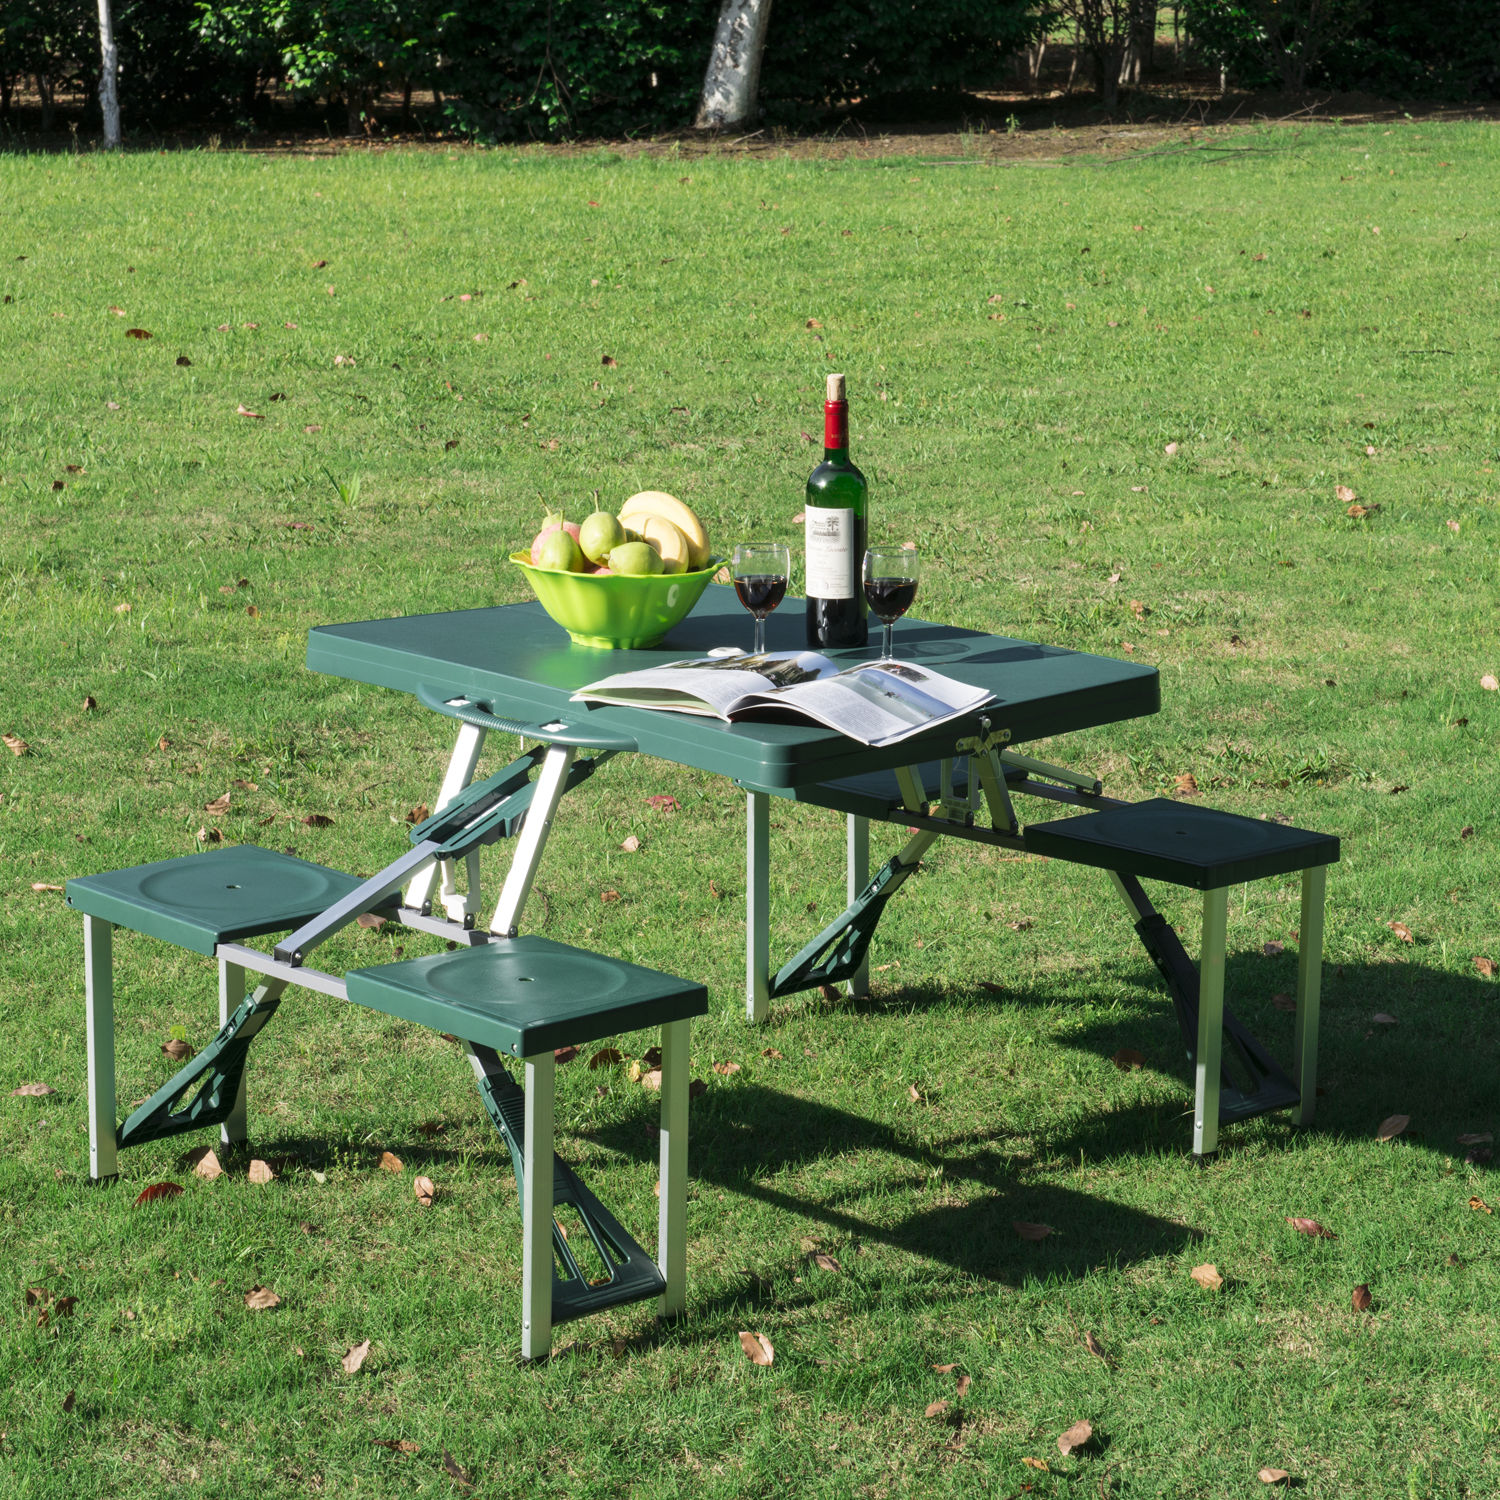 4/6FT Folding Camping Table Lightweight Outdoor Garden Picnic Party Table Stools 